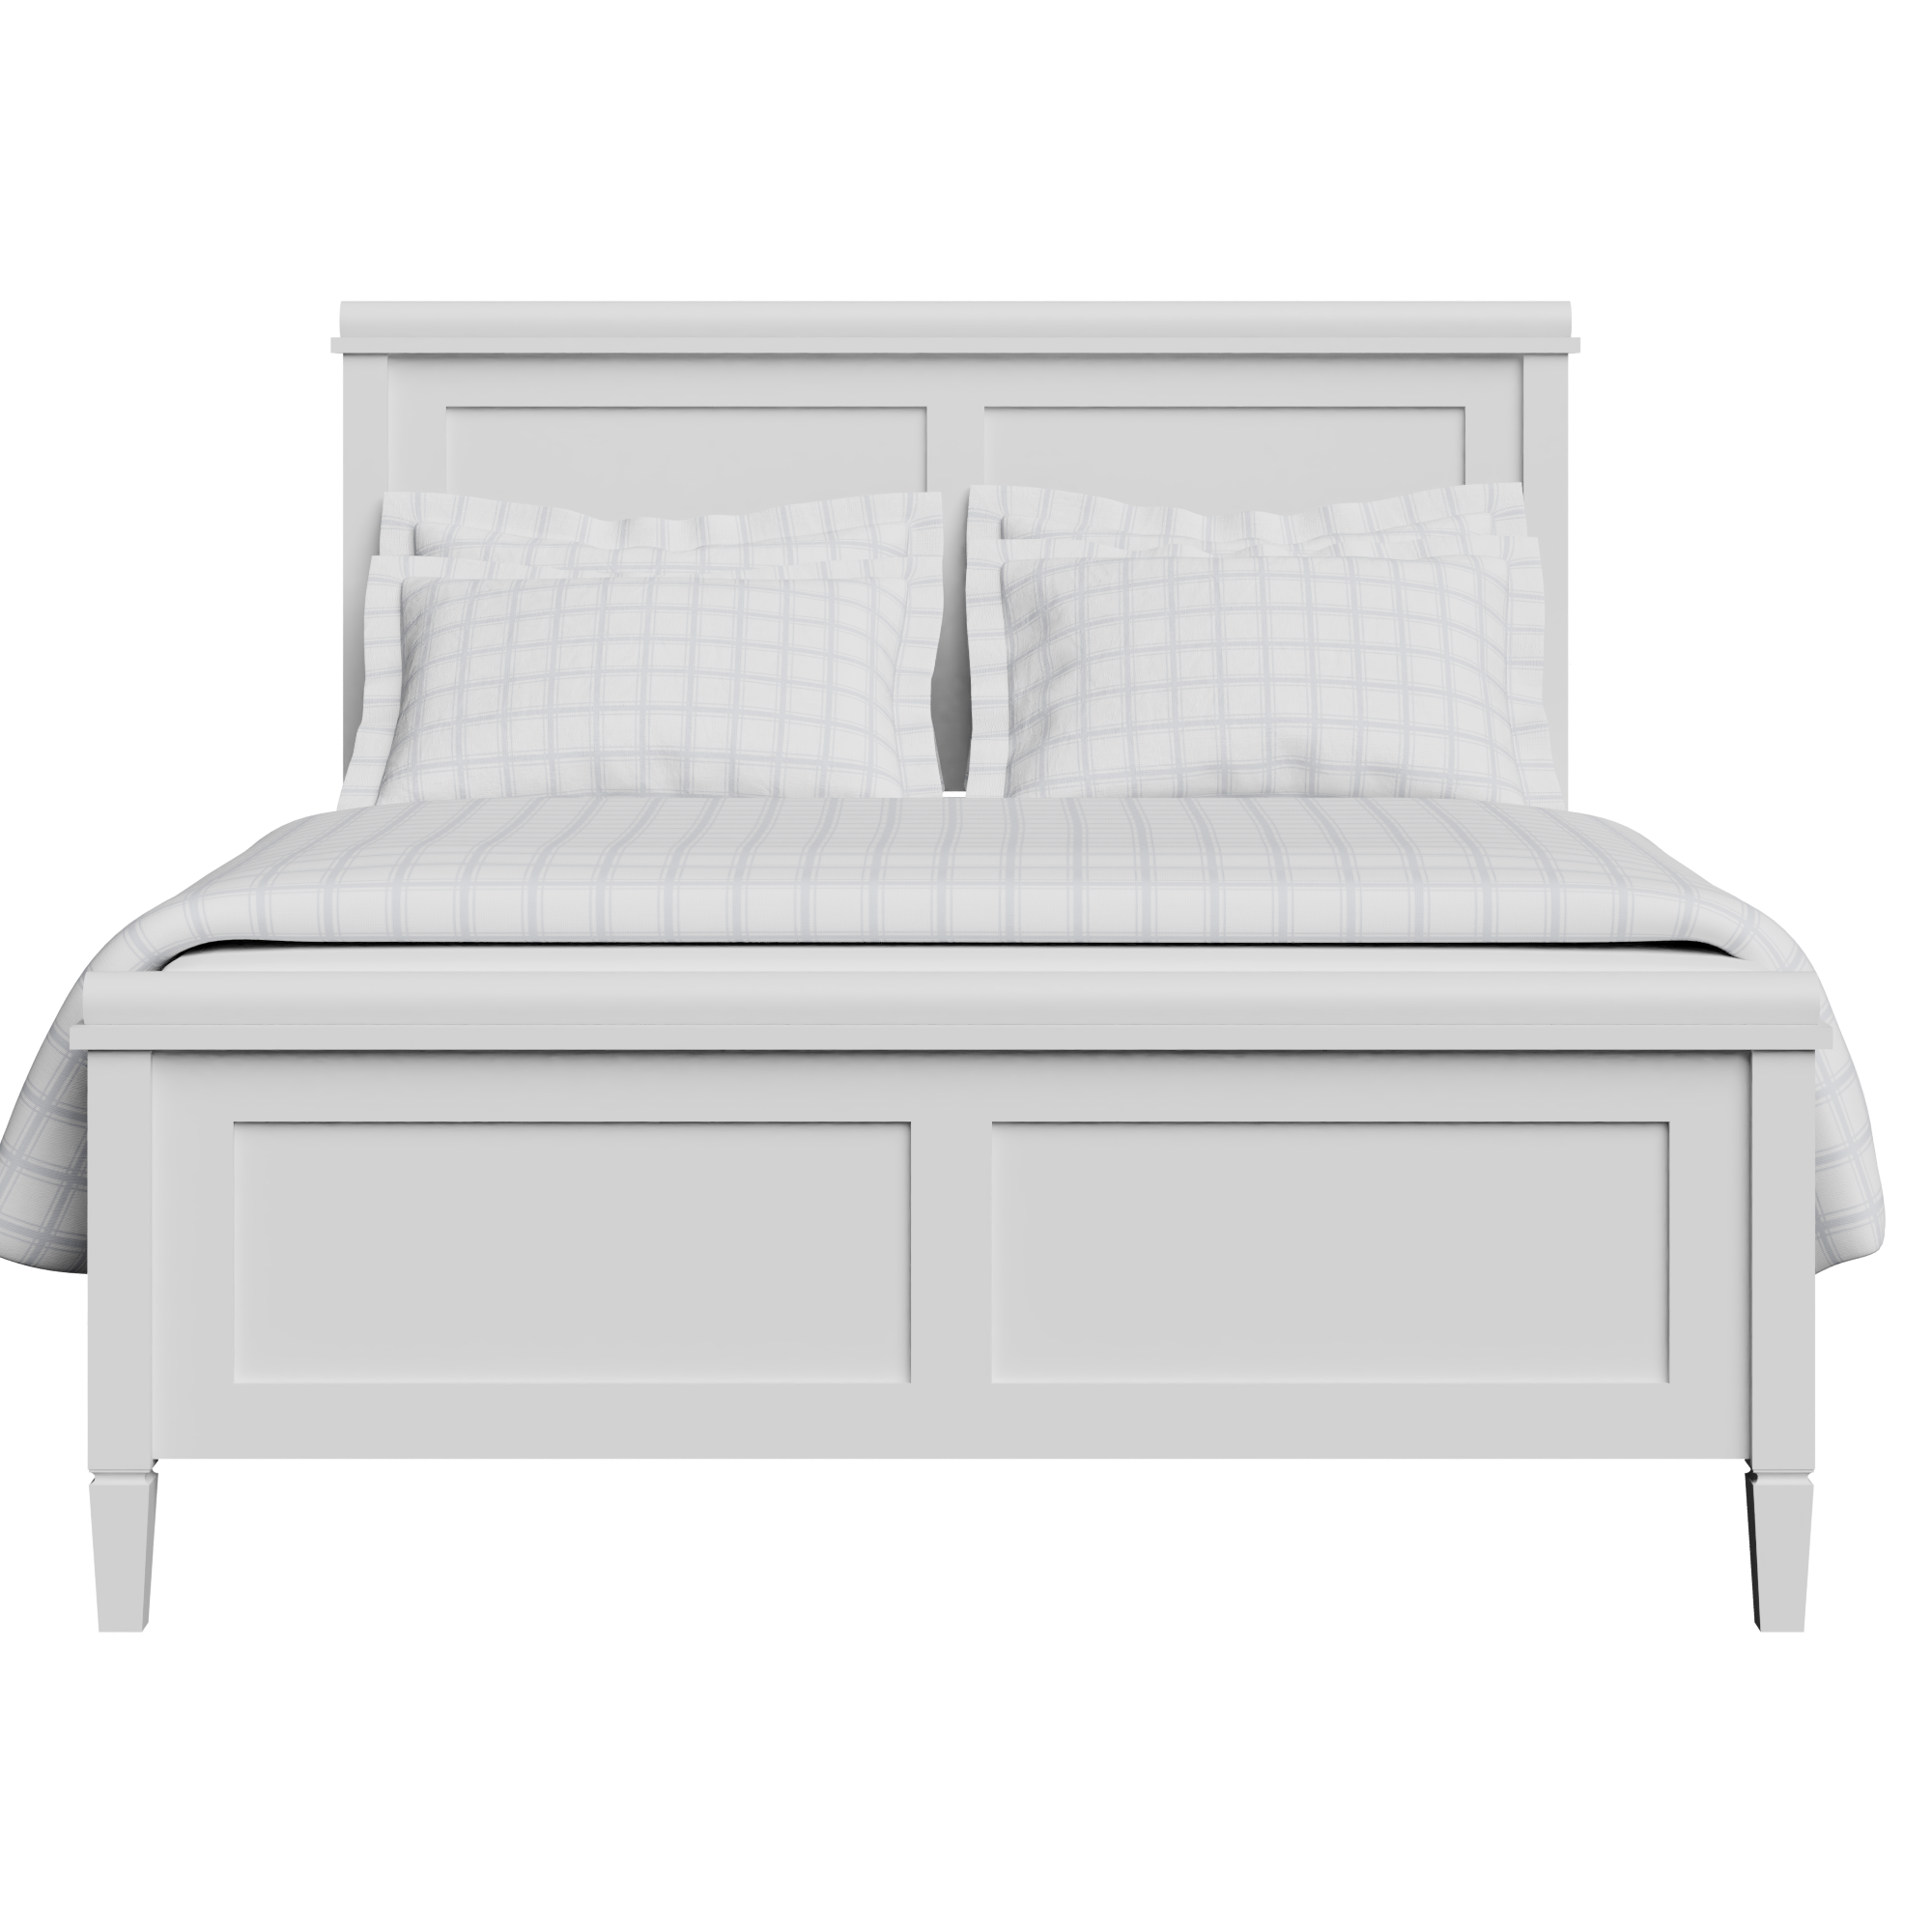 https://www.obc-uk.net/static/images/beds/wood/nocturne-painted-wood-bed-white-icon-linen.webp